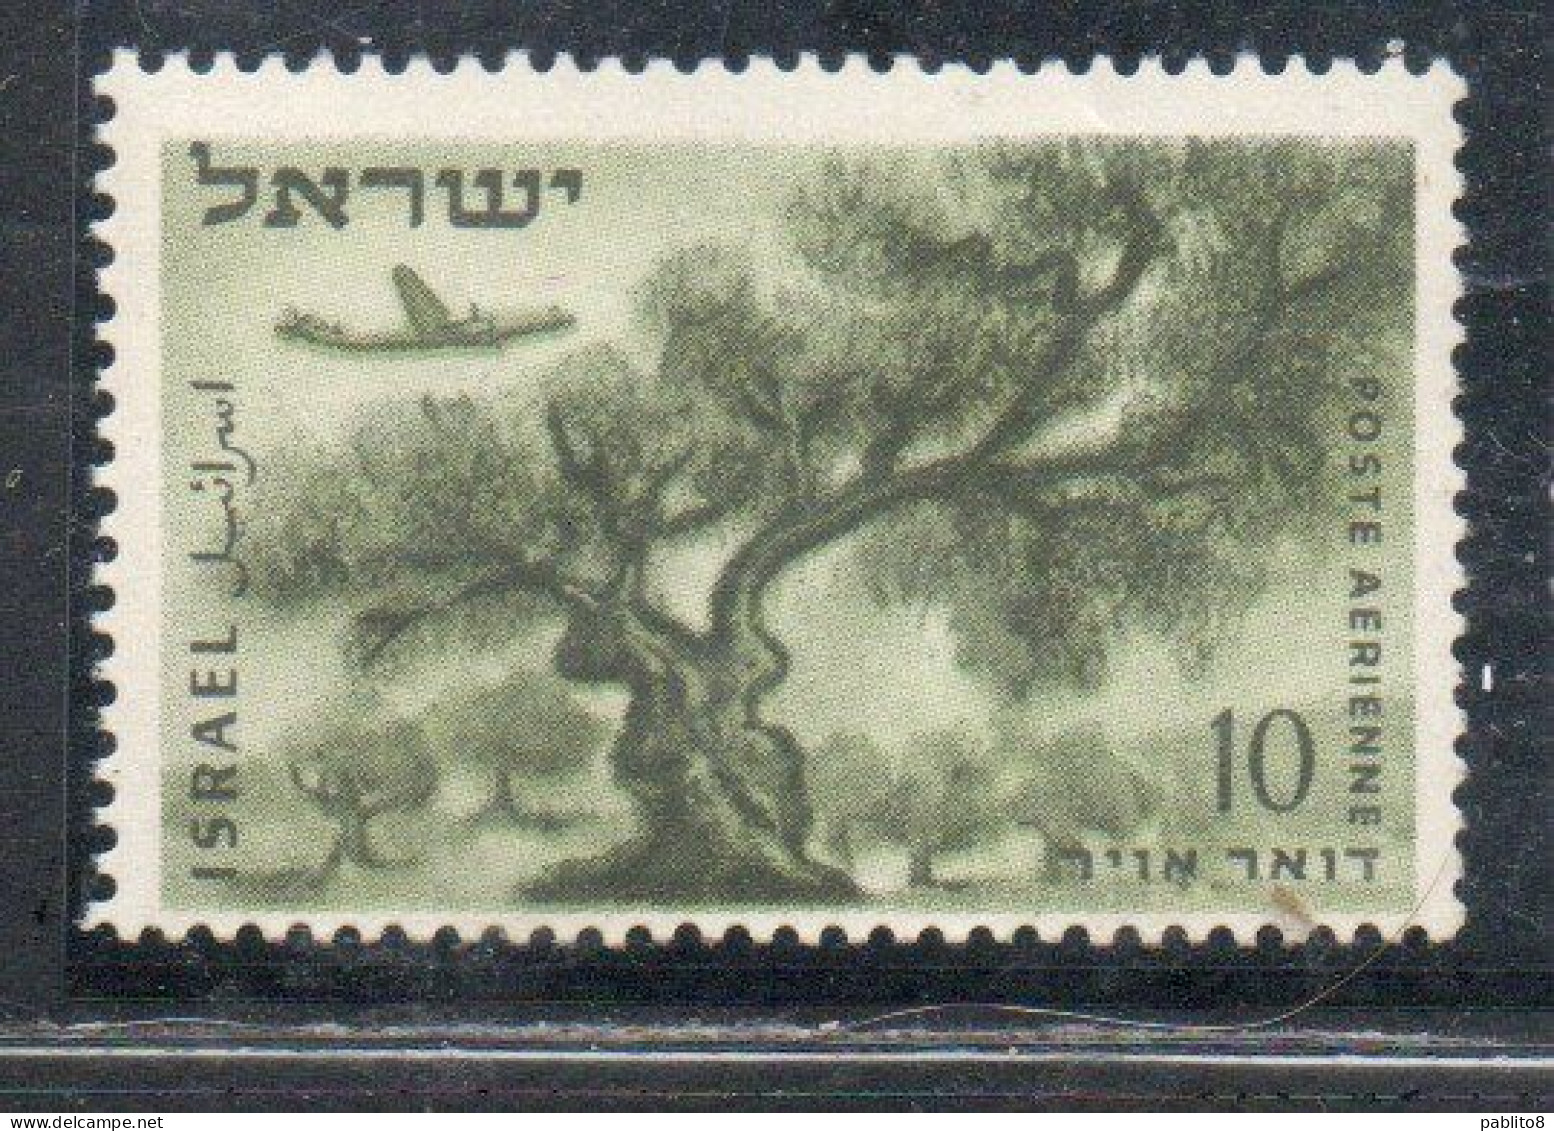 ISRAEL ISRAELE 1953 1956 AIRMAIL AIR POST MAIL  OLIVE TREE 10p MNH - Airmail